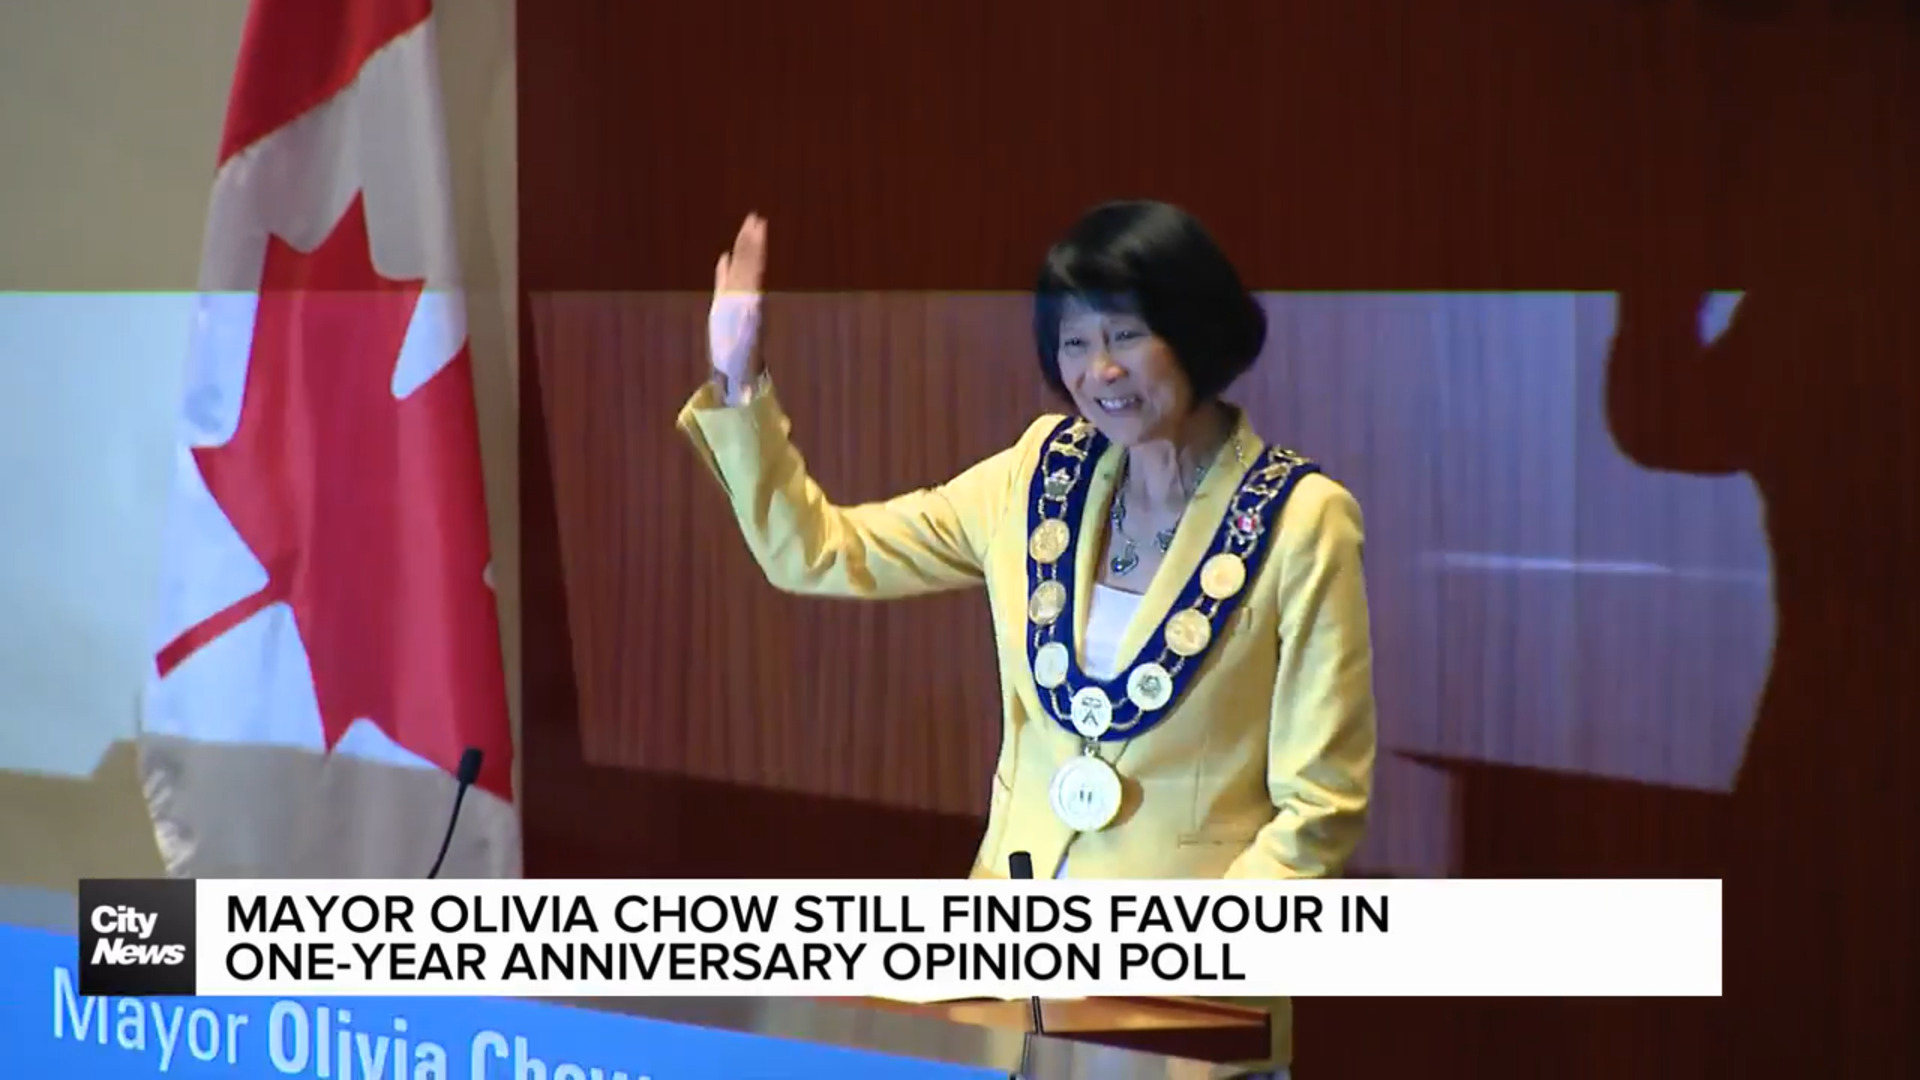 Mayor Olivia Chow sees approval ratings rise for one-year anniversary